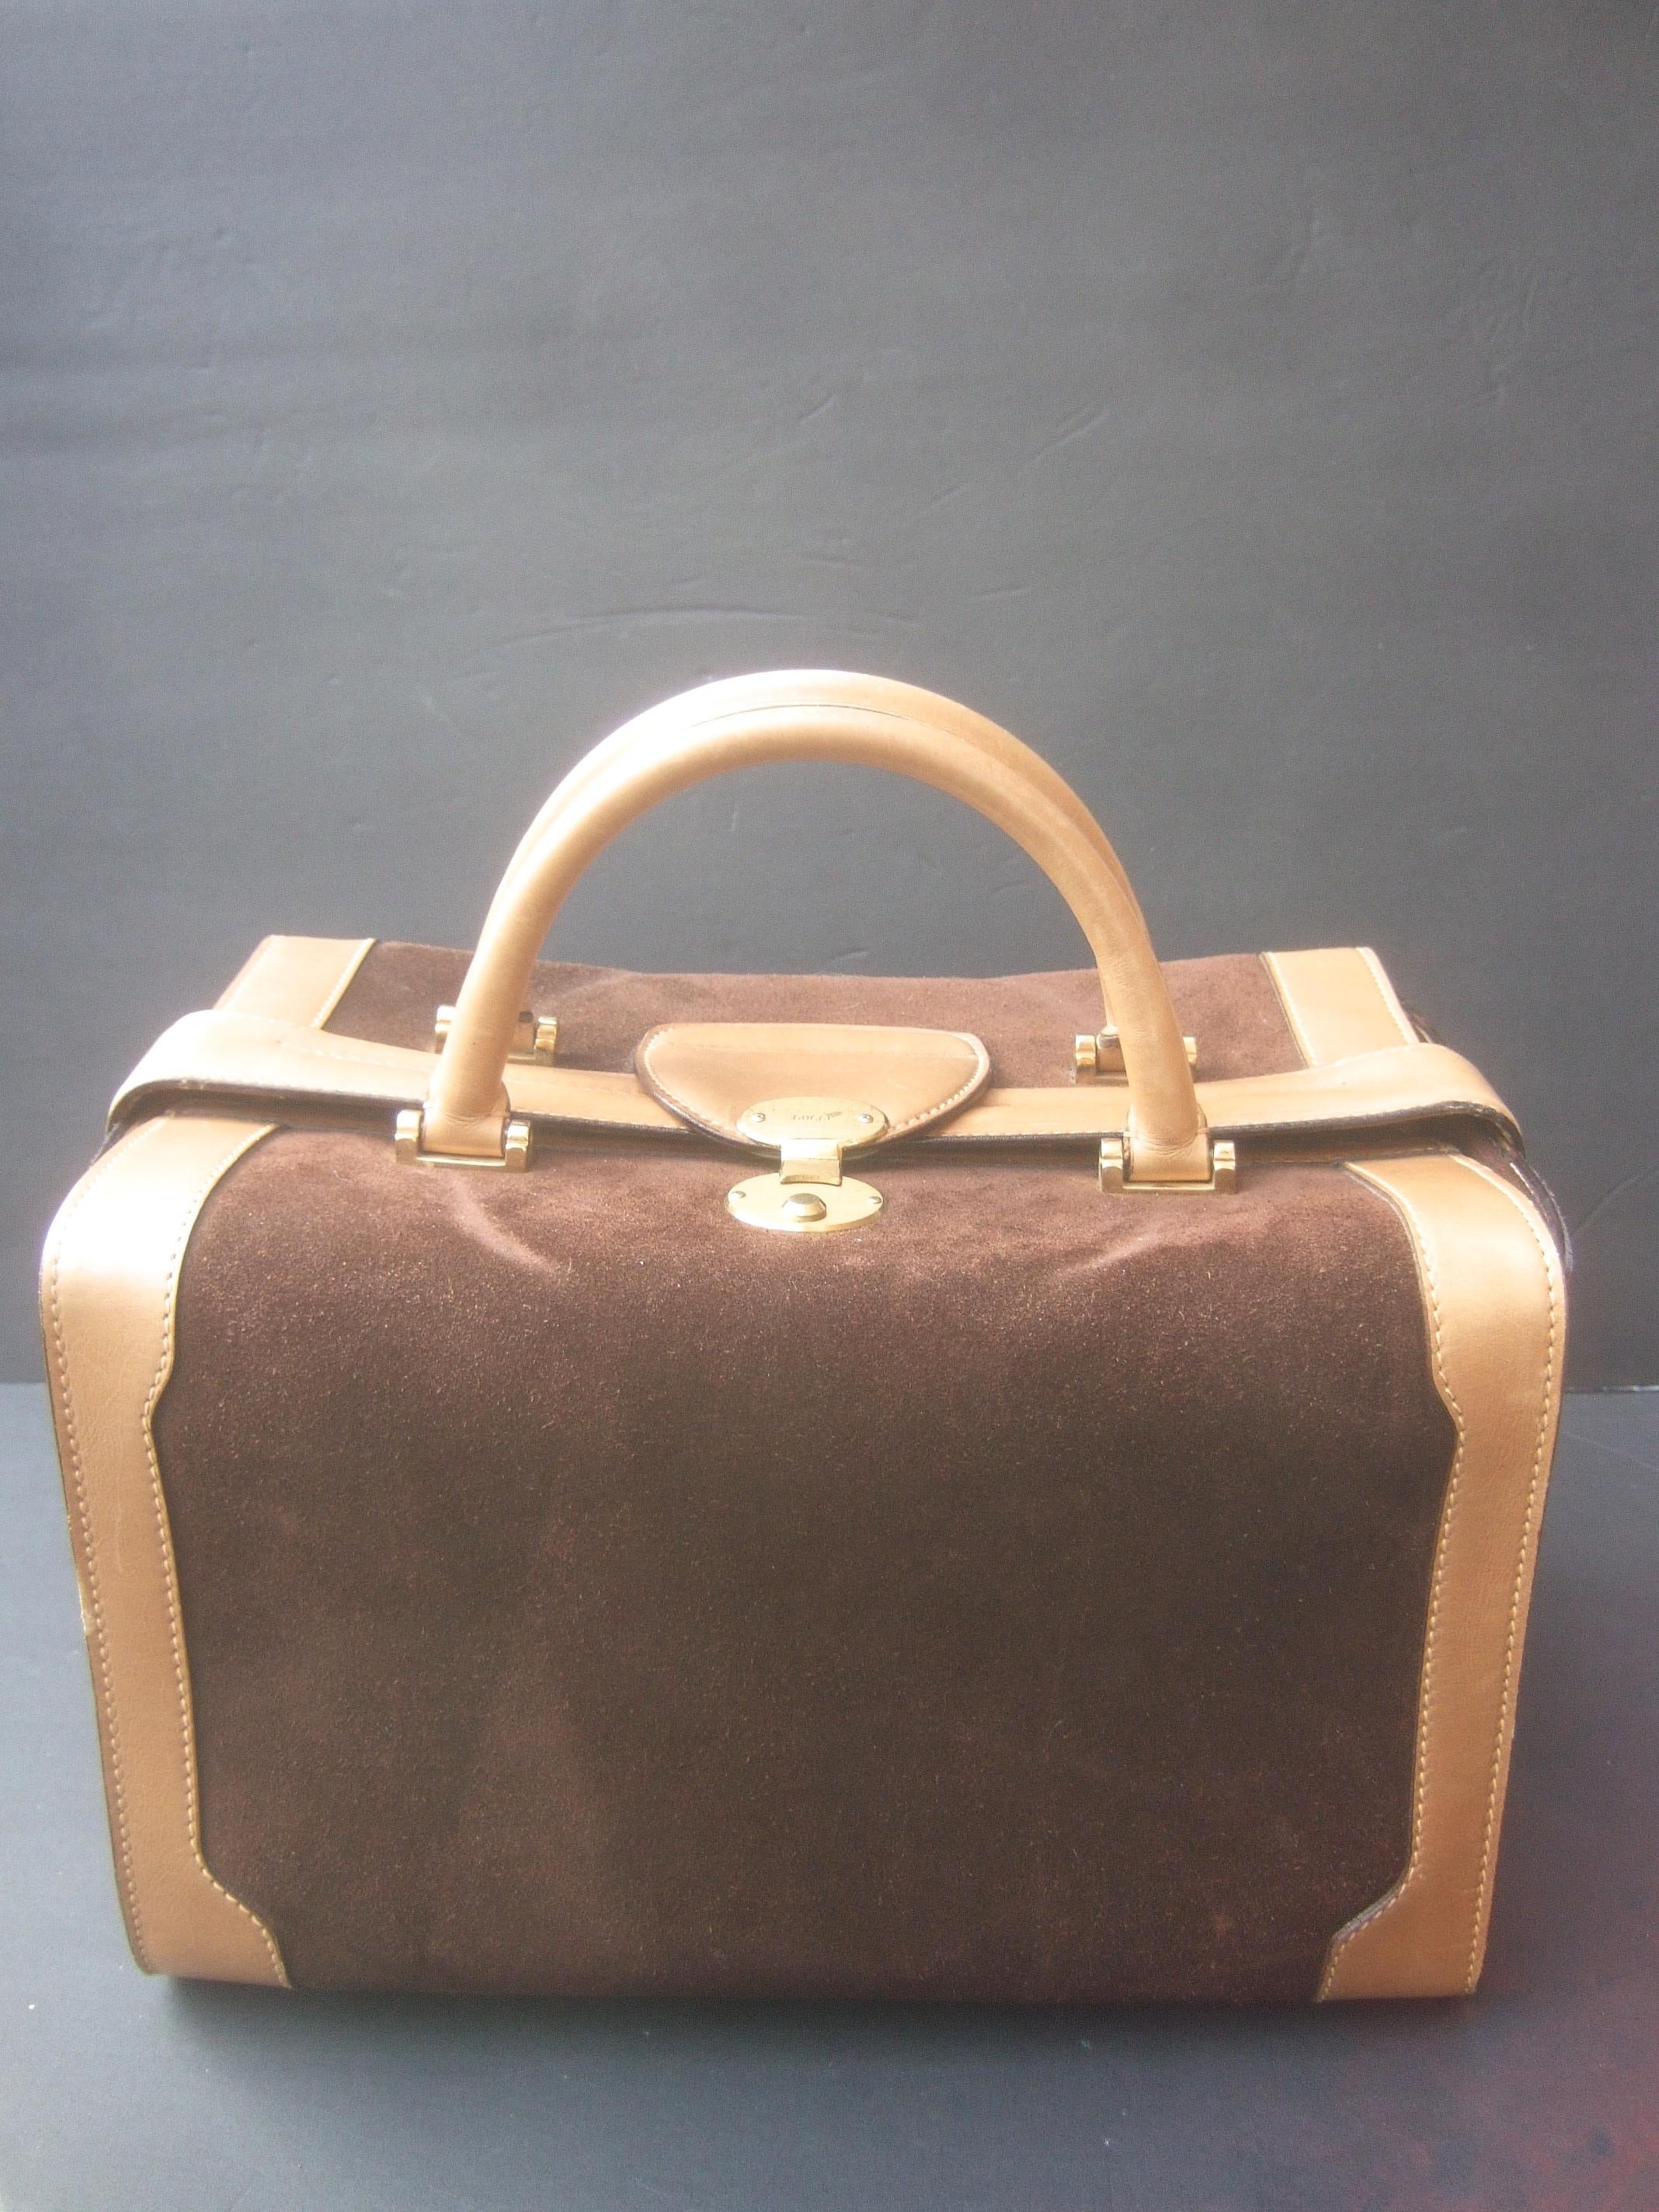 Gray Gucci Italy Rare Chocolate Brown Suede Leather Trim Train Case c 1970s